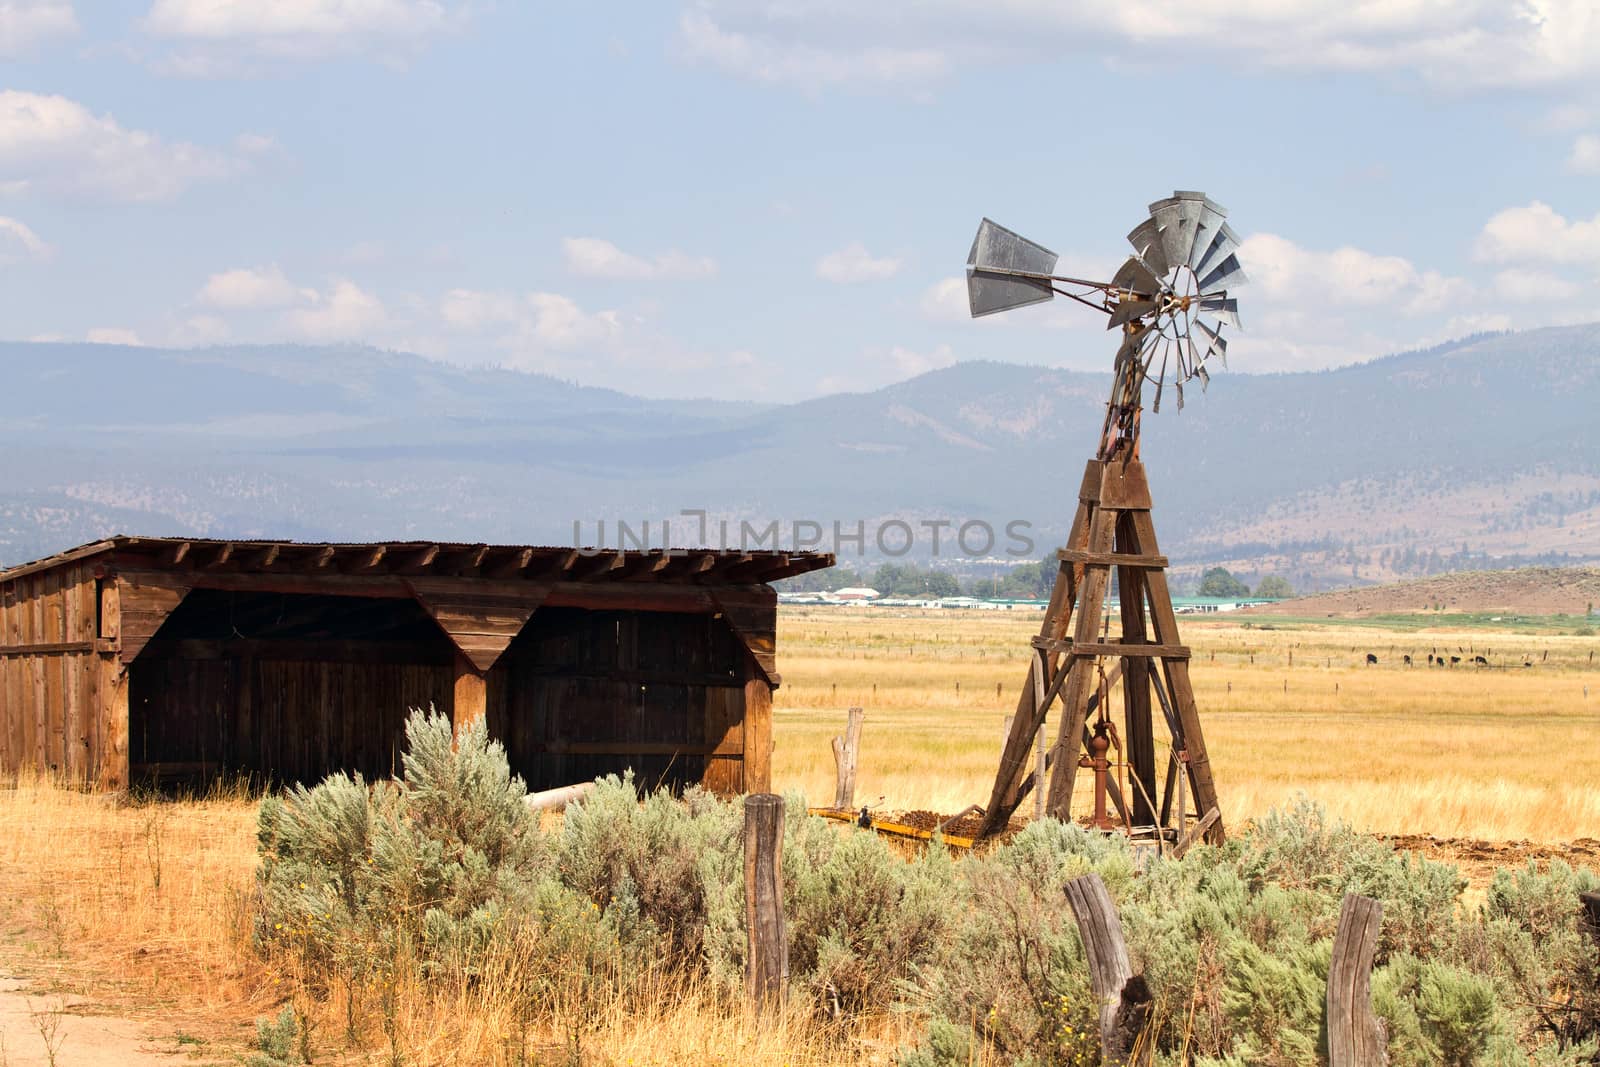 Old wind driven water pumping windmill stands next to an empty storage shed on a cattle ranch in a California mountain valley.